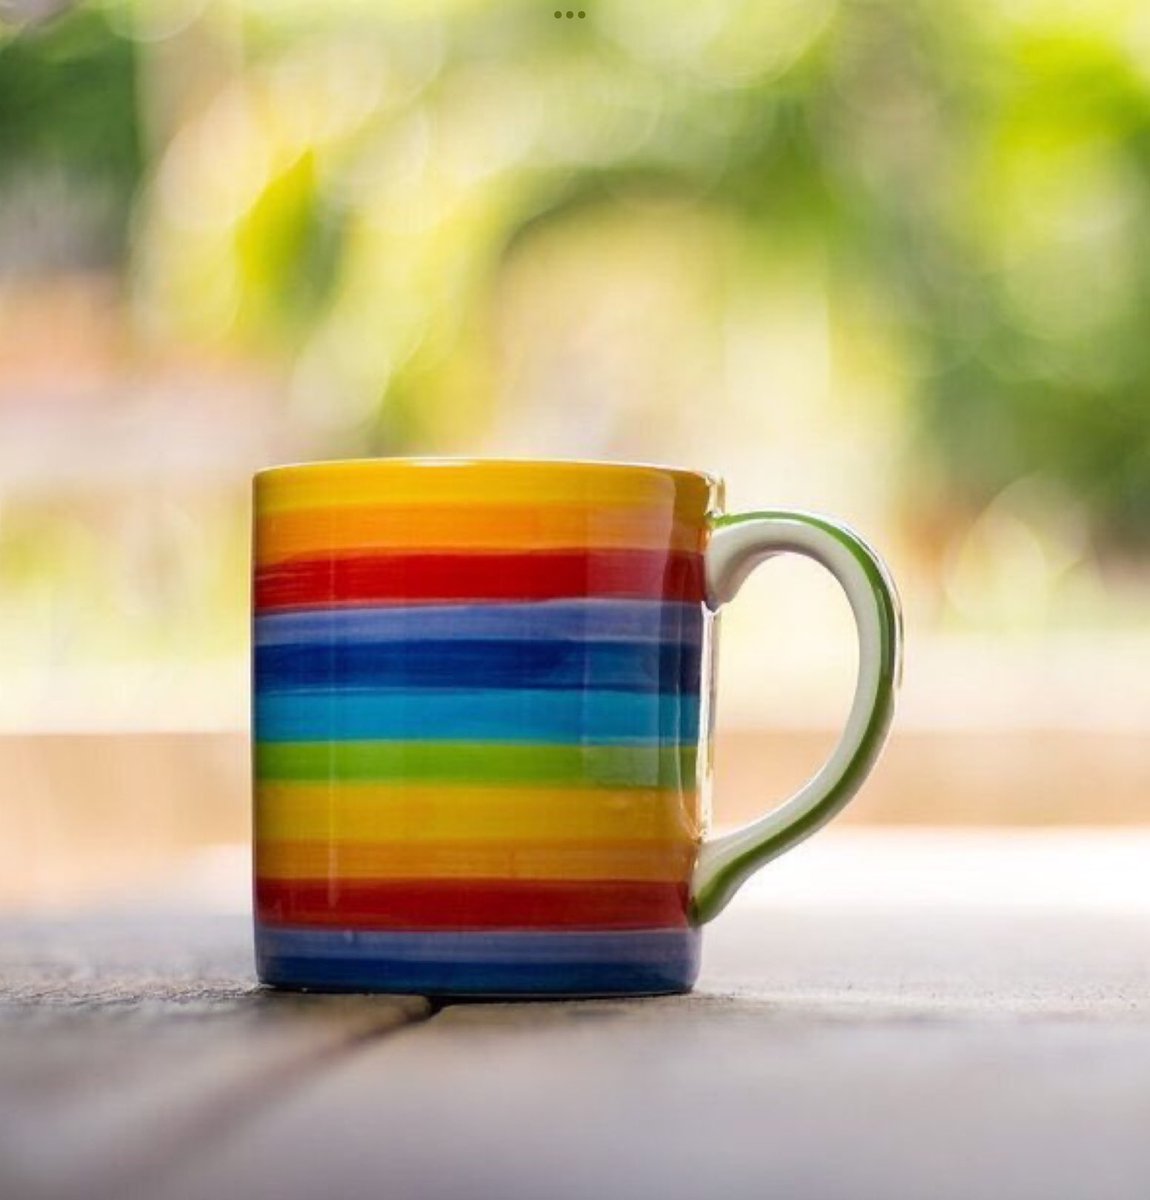 ☕️☕️🙋🏼‍♀️

Saturdays are the days that fill the soul with sunshine.

#Coffee helps

@Cbp8Cindy @QueenBeanCoffee @suziday123 @LoveCoffeeHour @FreshRoasters @Stefeenew 

#CoffeeCulture #CoffeeLover #CoffeeLover #CoffeeLovers #CoffeeTime #CoffeeShop #CoffeeAddicts #CoffeeCup